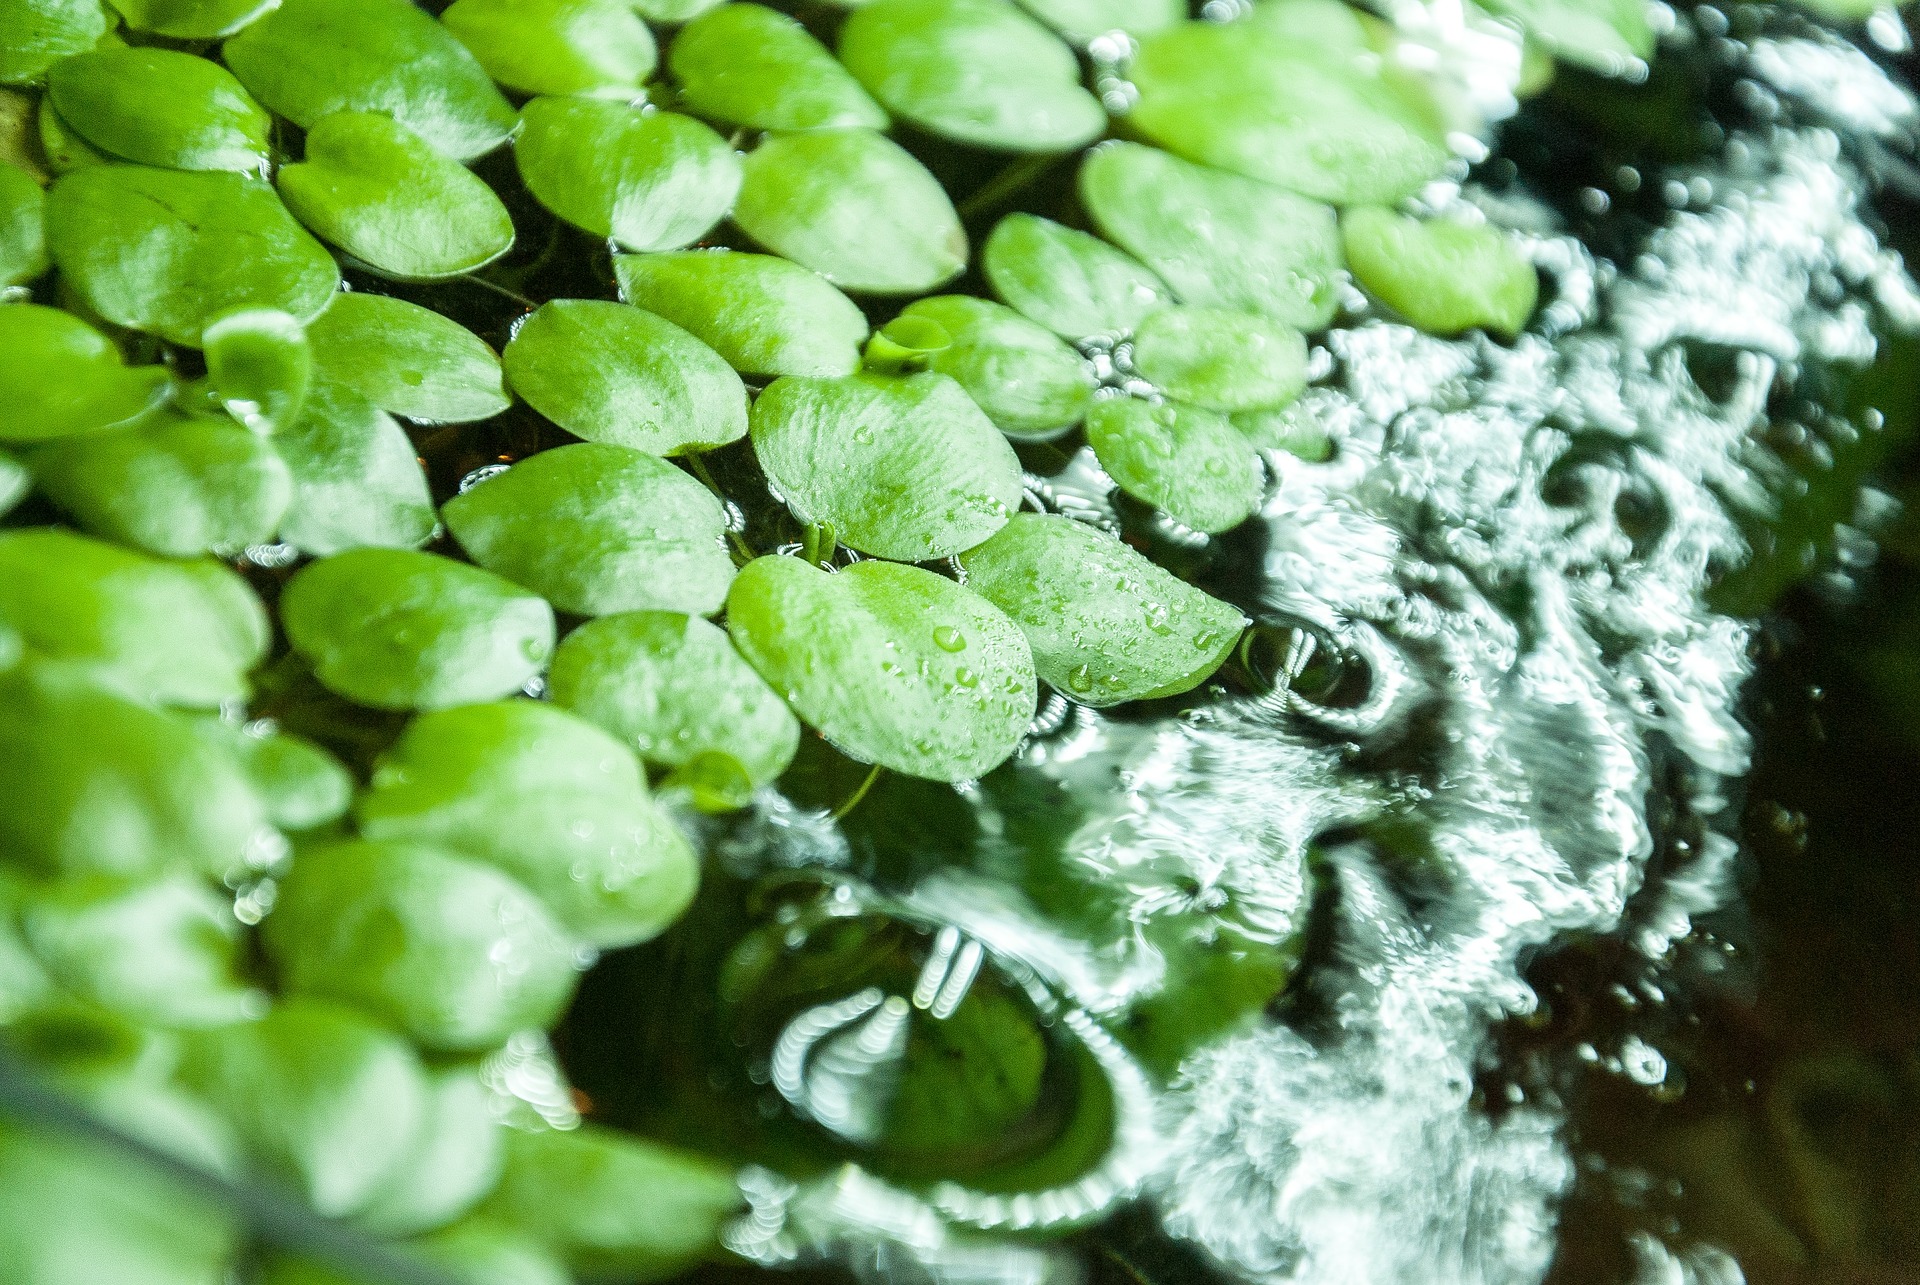 Aquatic plants floating on water surface